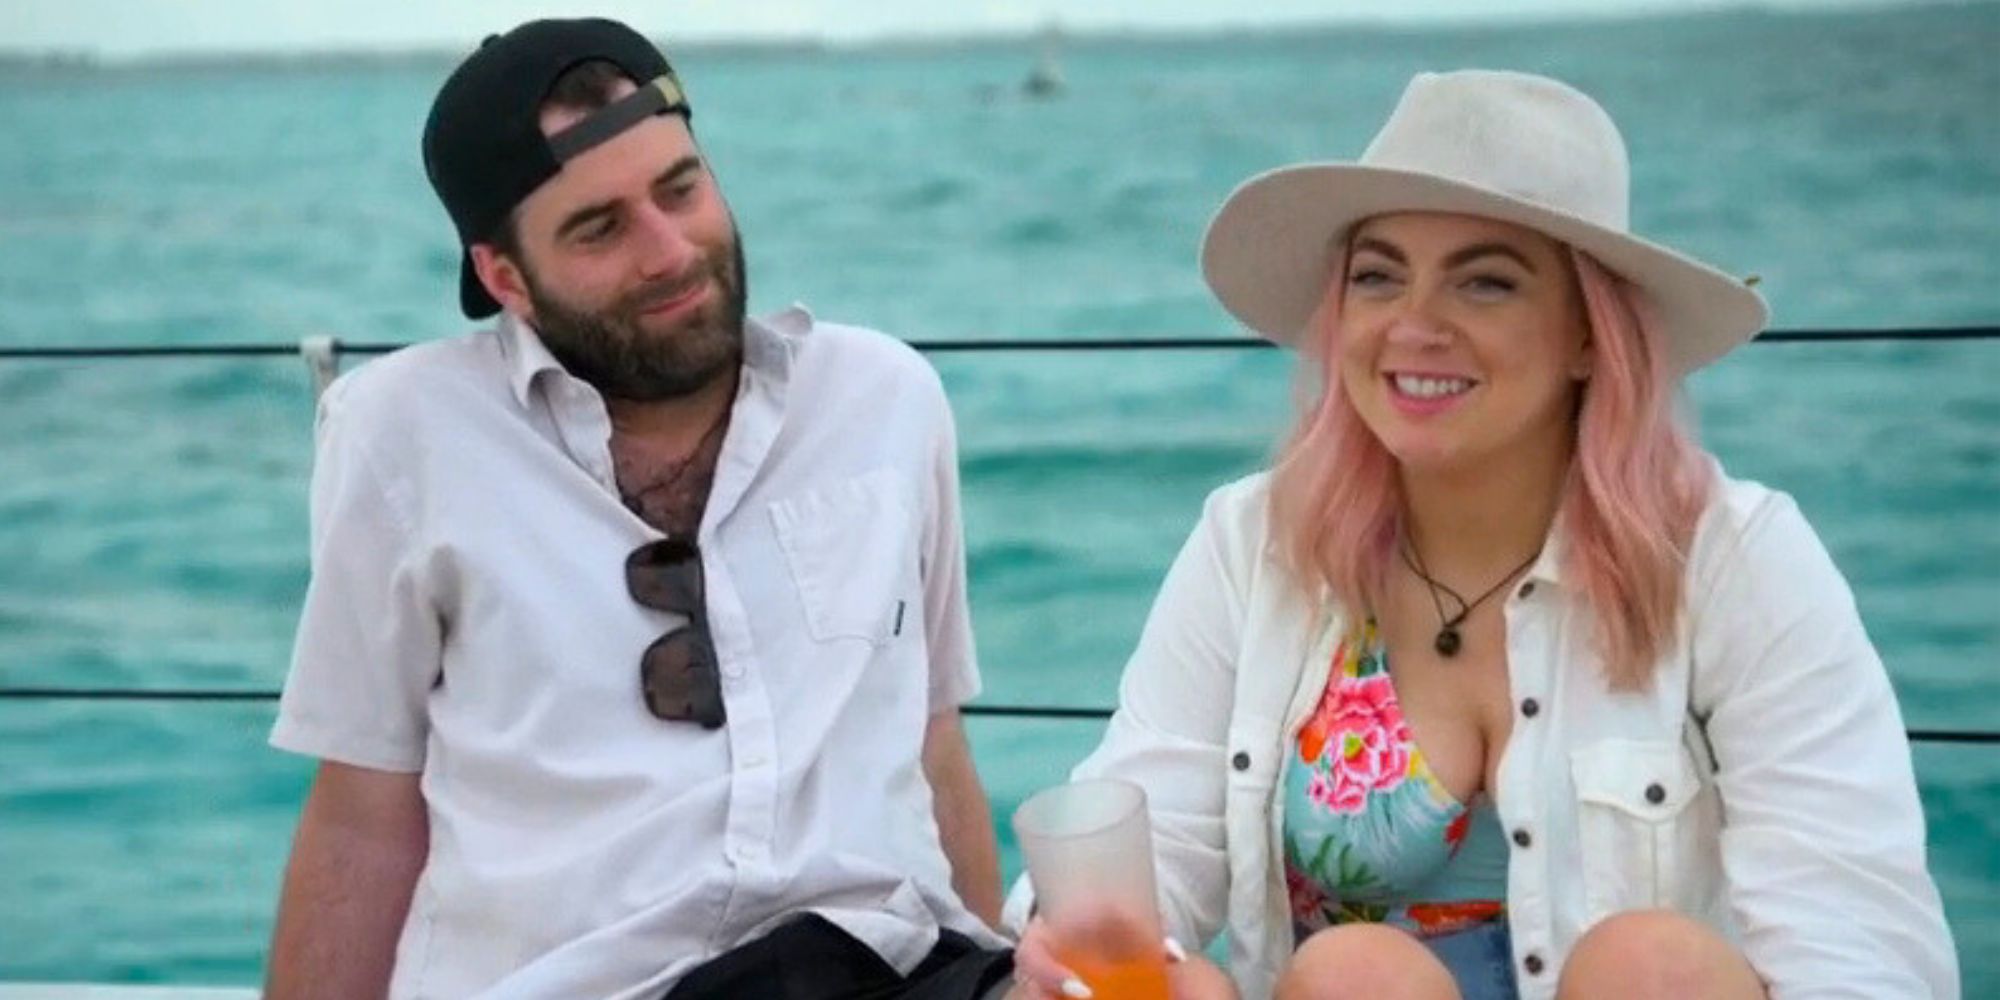 Becca and Austin from MArried at First Sight season 17 sitting on a boat taling